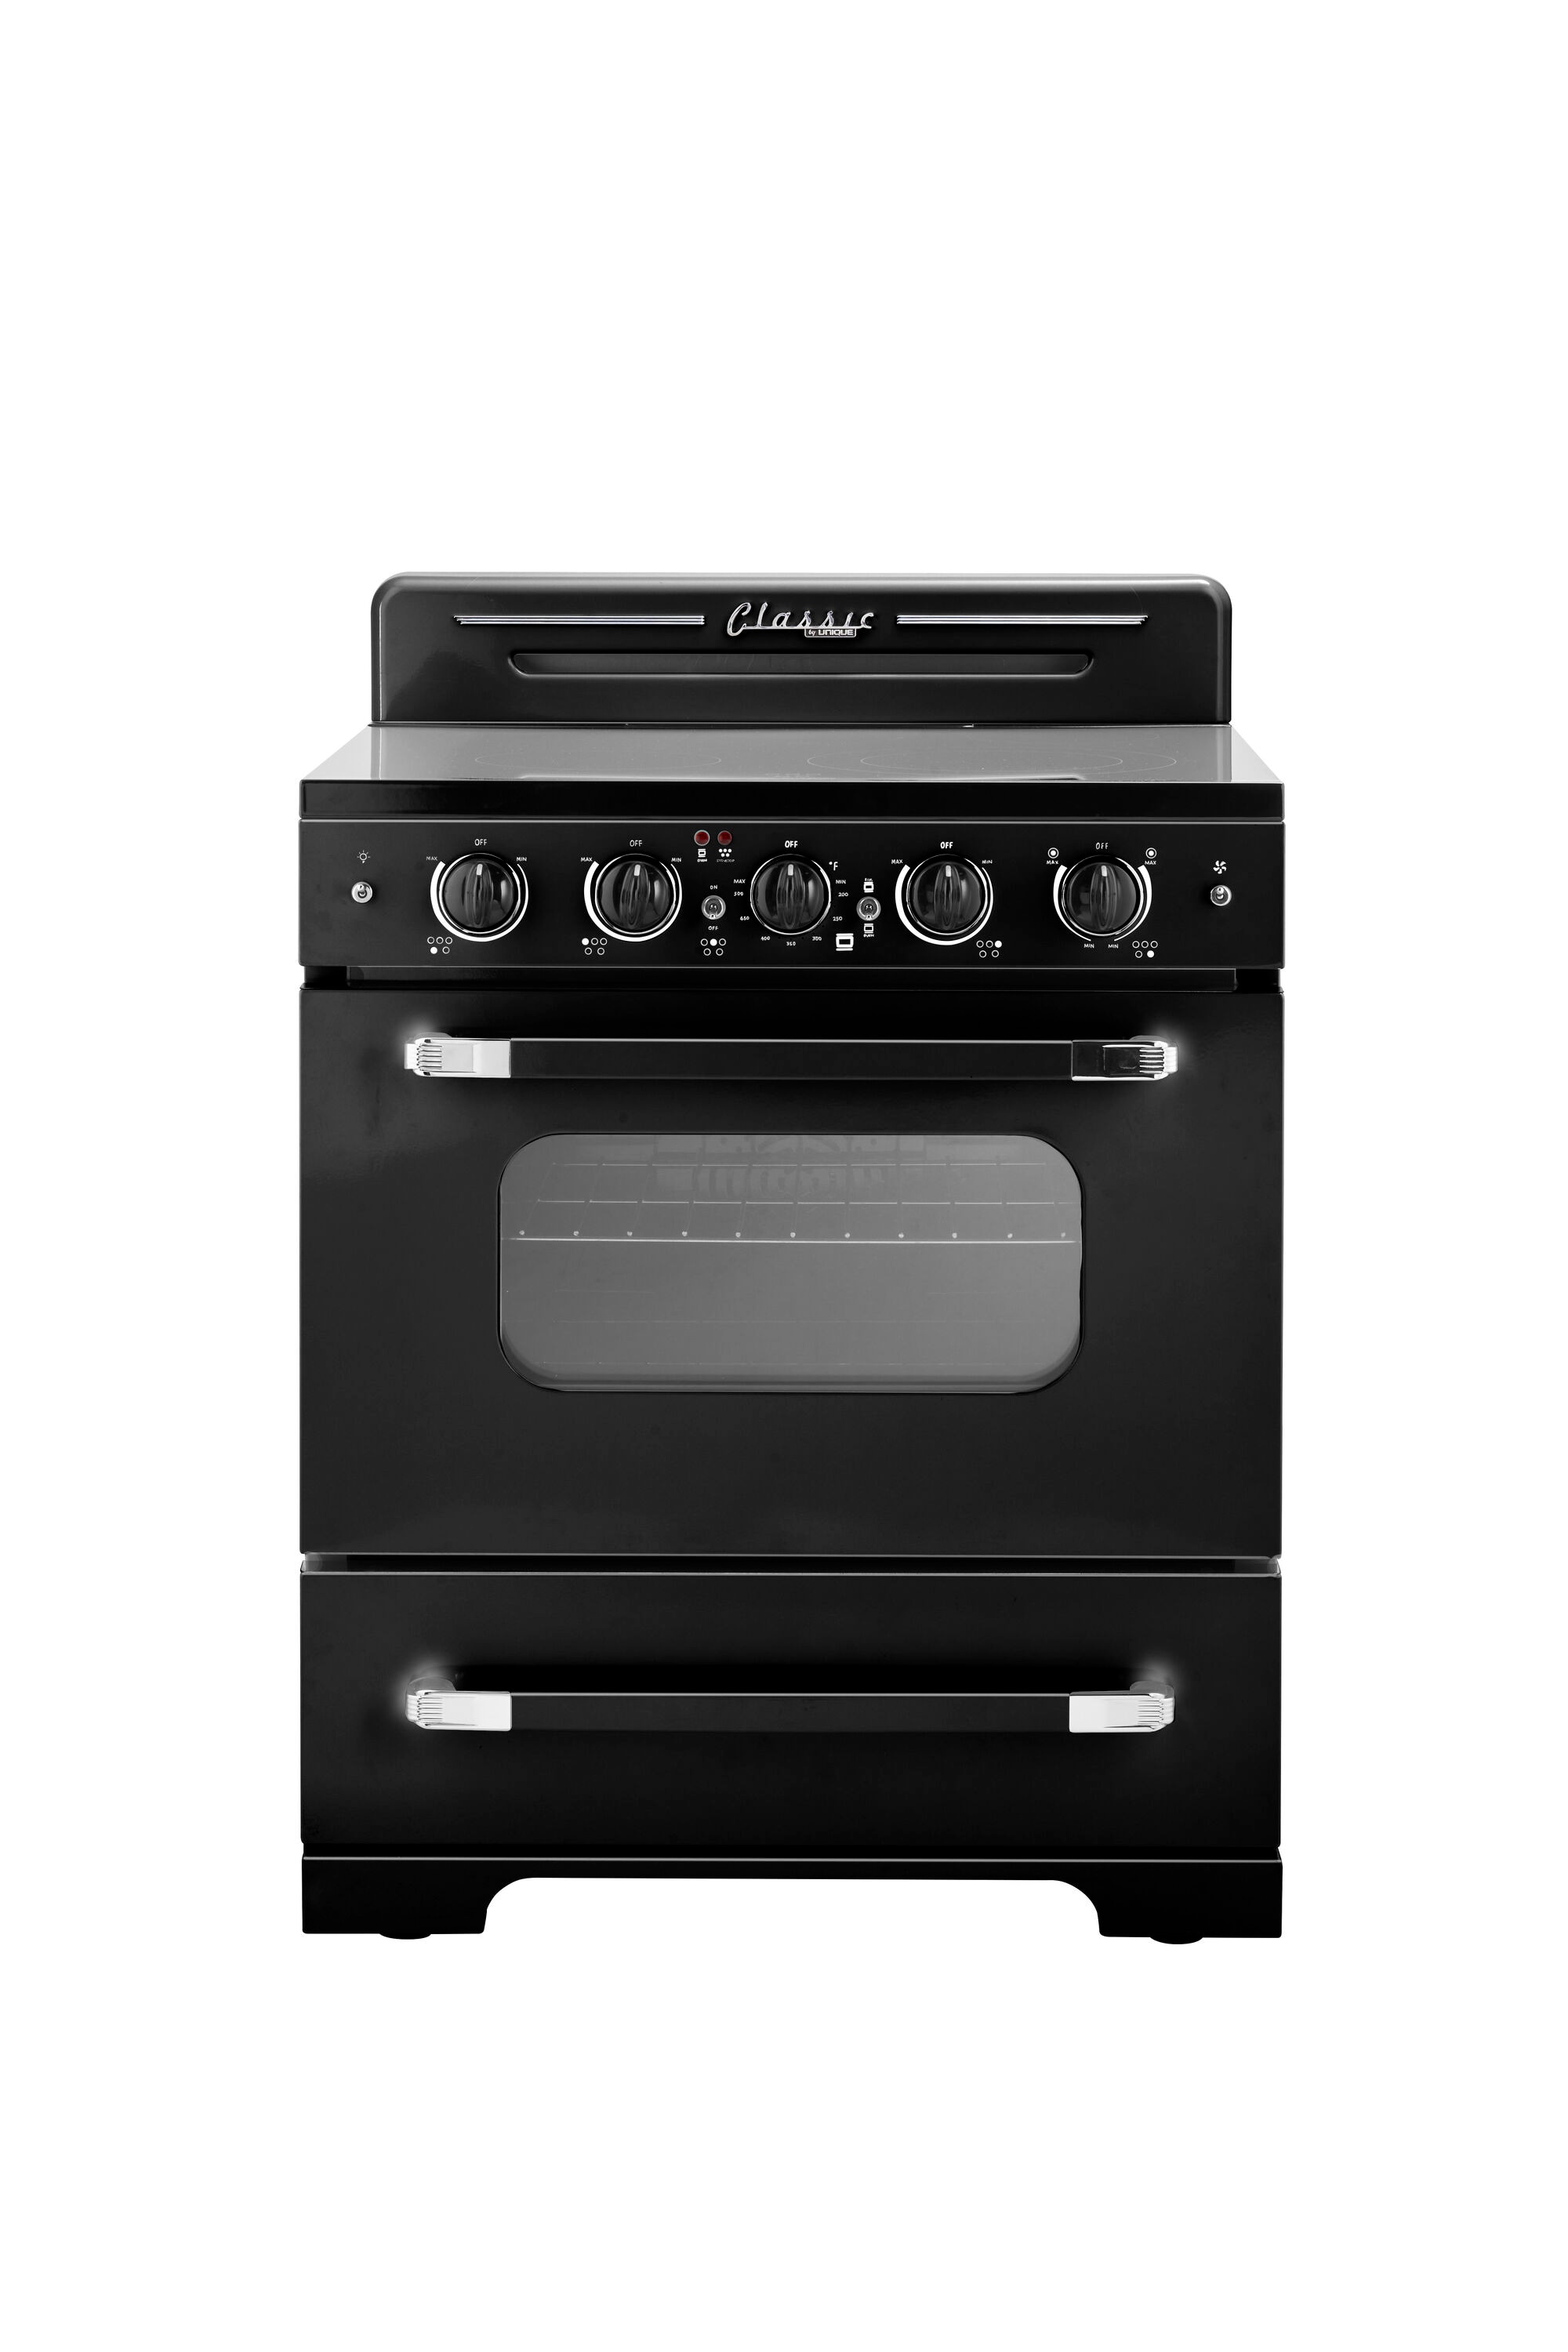 Unique Appliances Prestige 20 in. 1.6 cu. ft. Electric Range with  Convection Oven in Stainless Steel UGP-20V EC S/S - The Home Depot